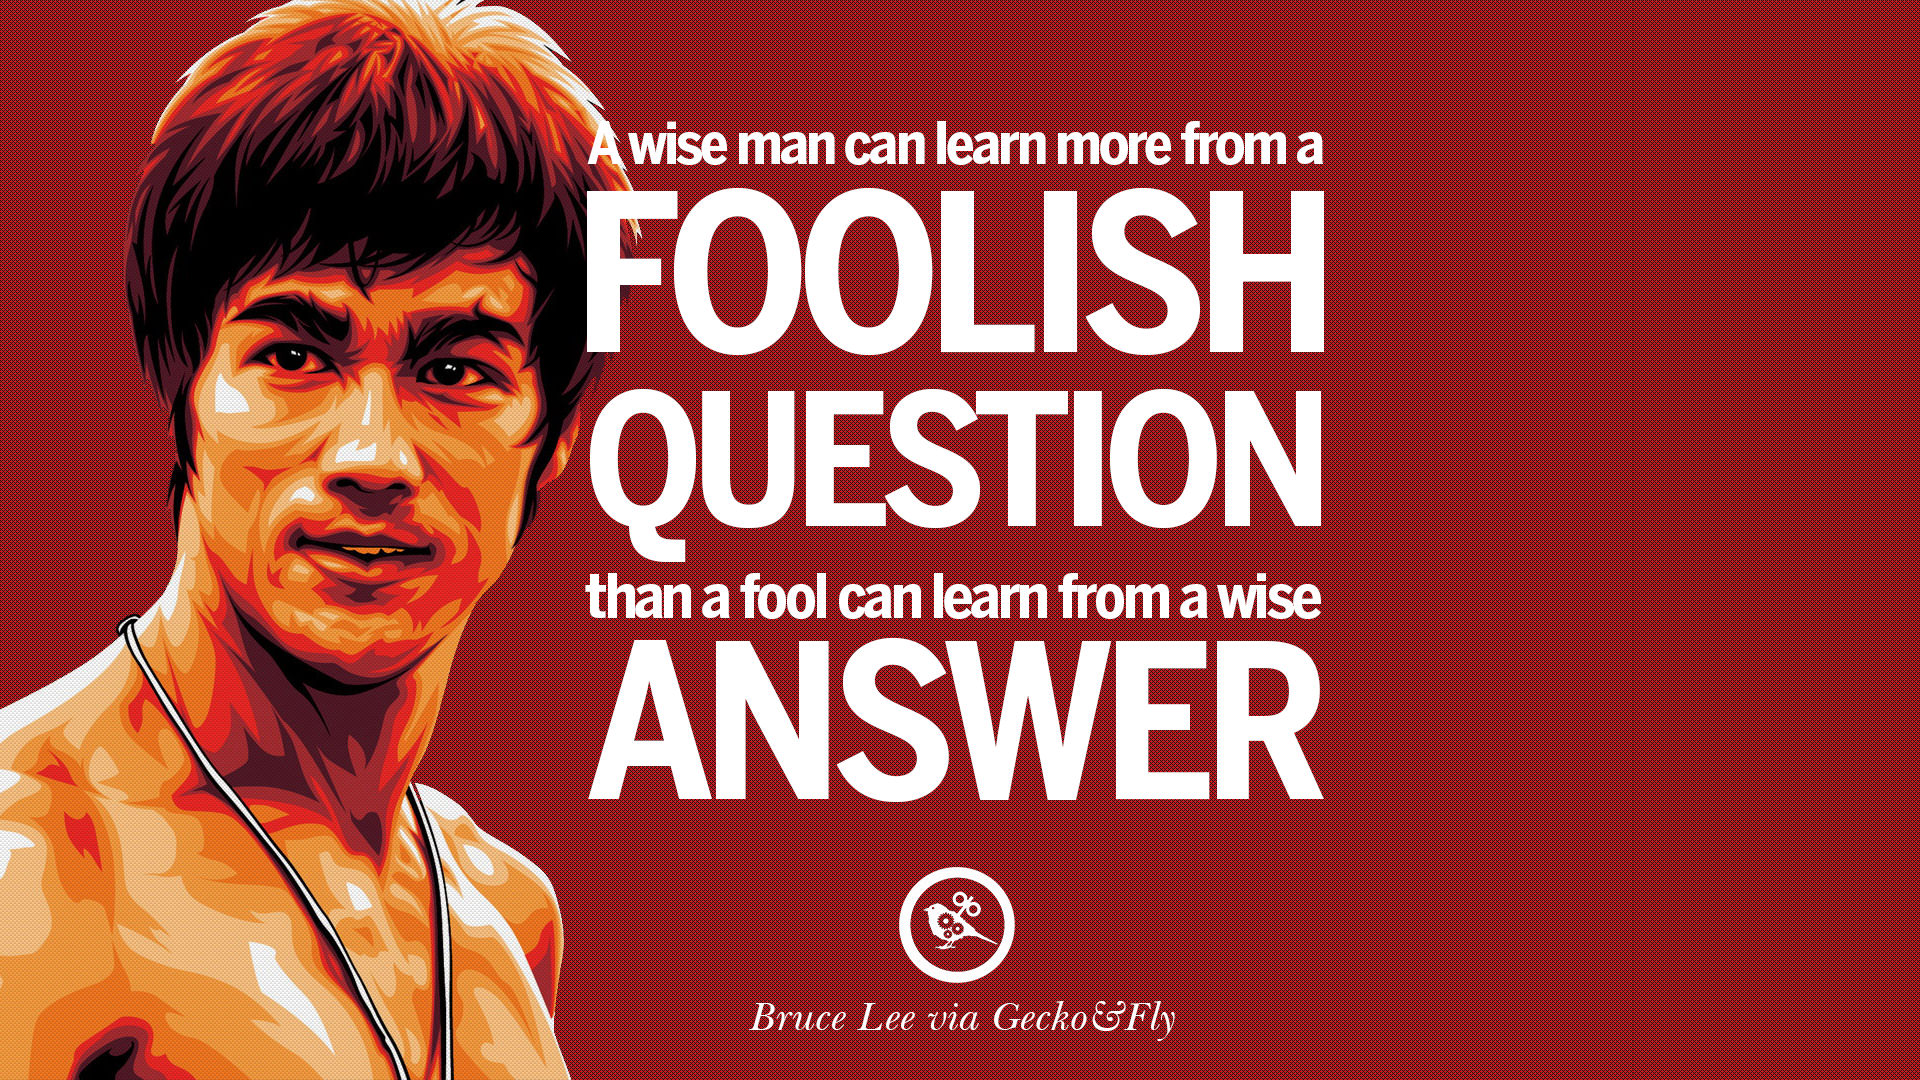 25 Inspirational Quotes from Bruce Lee's Martial Arts Movie